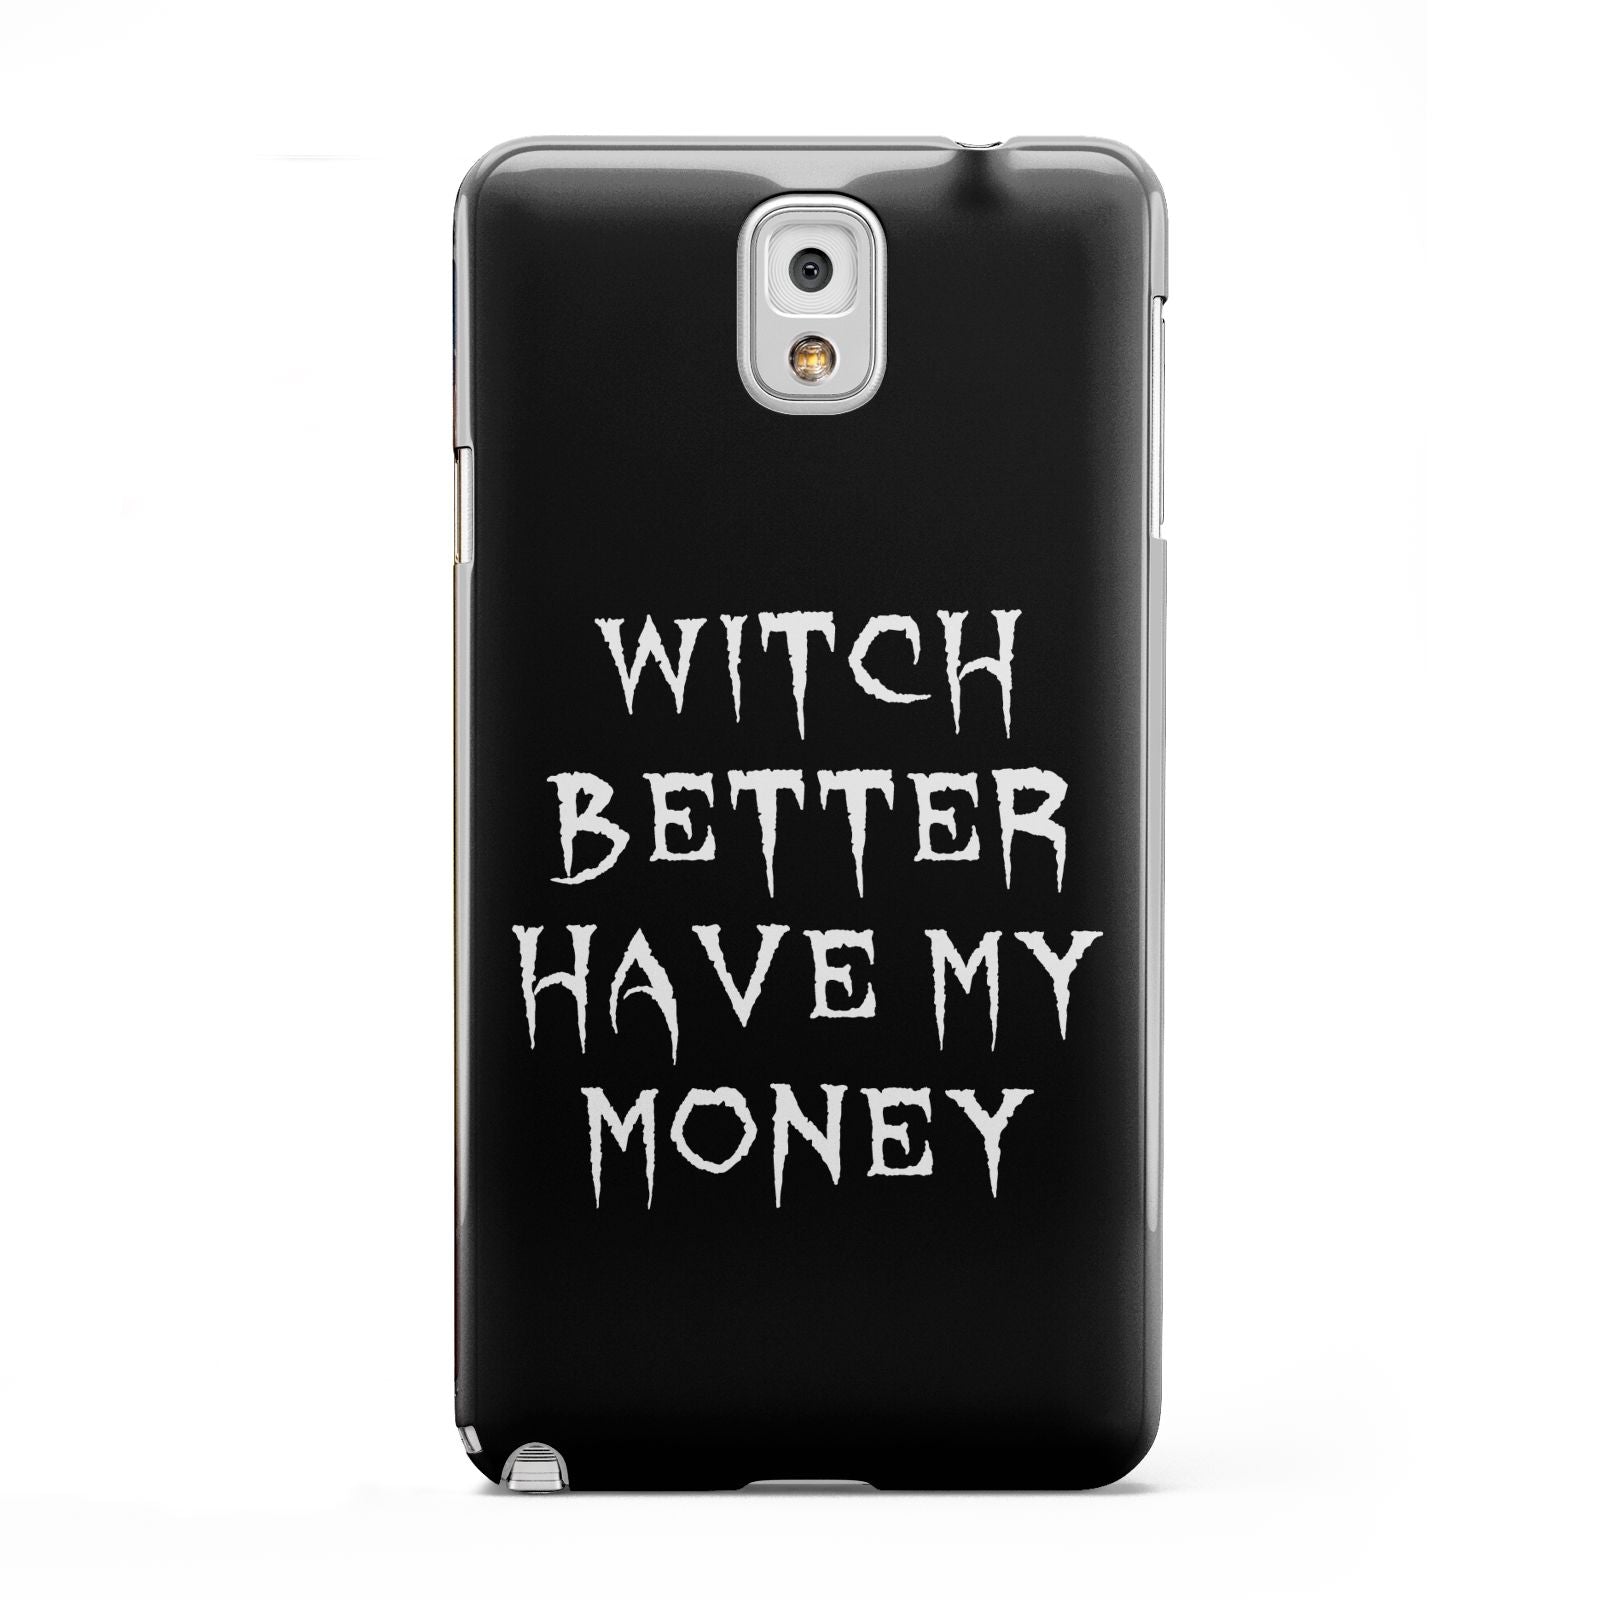 Witch Better Have My Money Samsung Galaxy Note 3 Case